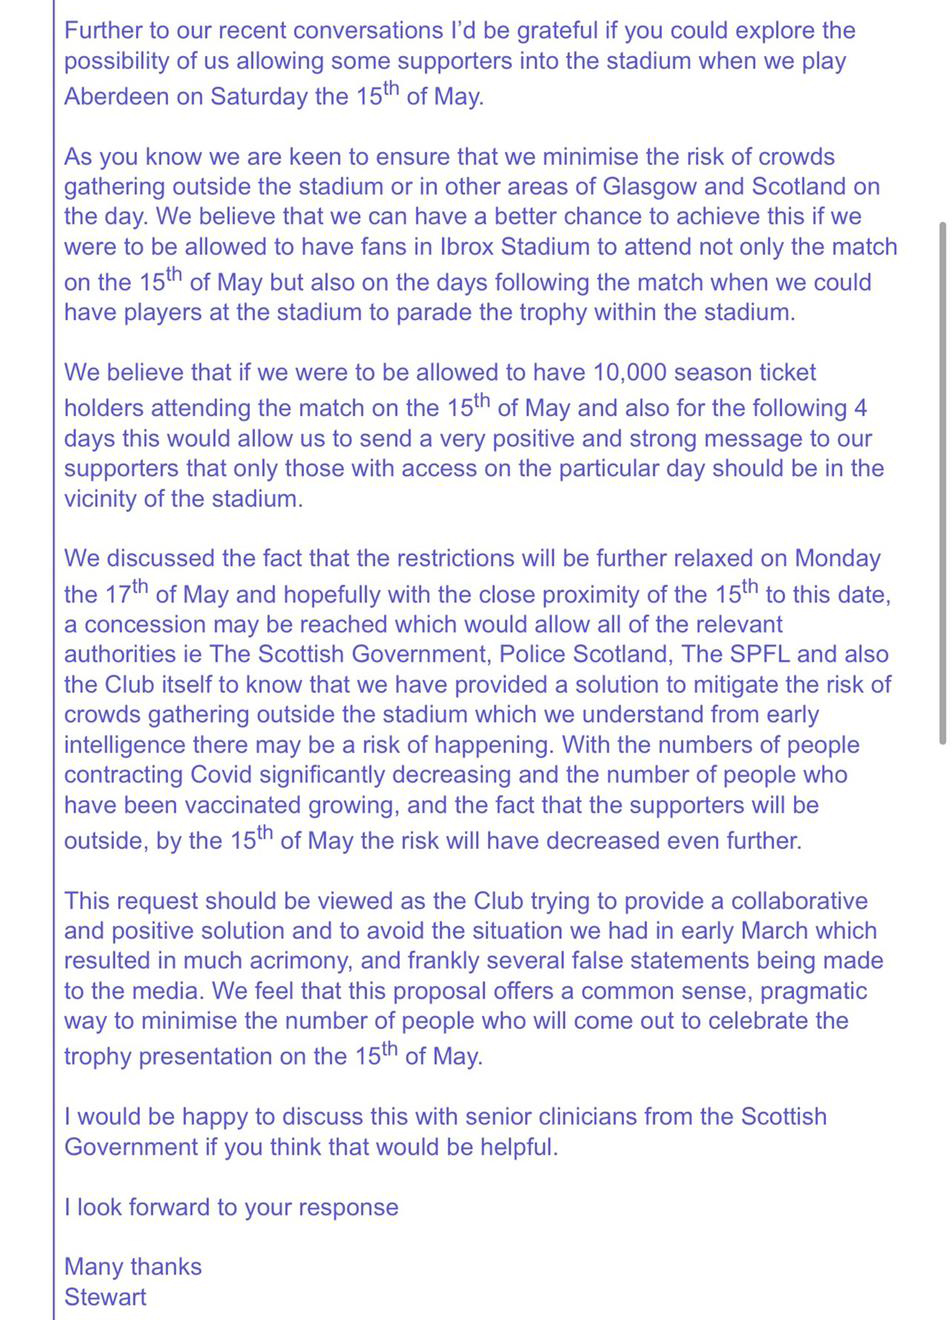 Letter from Rangers chief executive Stewart Robertson to Scottish Government offering to host 10,000 fans at Saturday's trophy presentation